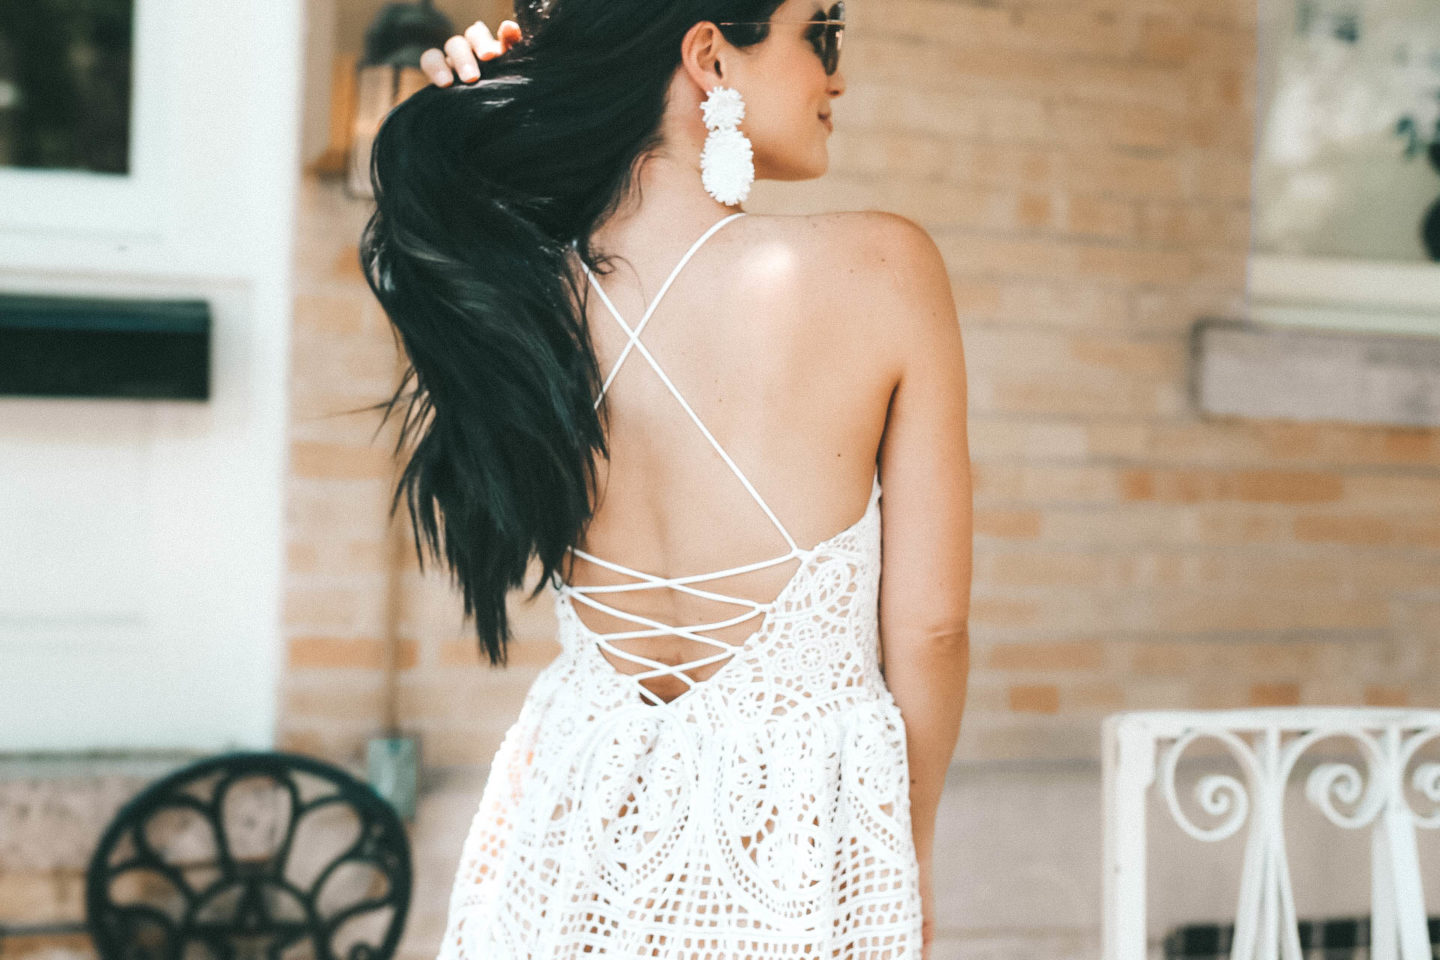 DTKAustin shares her must have white lace, crochet dress for summer from Chicwish. Beautiful lace up back detail with Baublebar statement earrings.